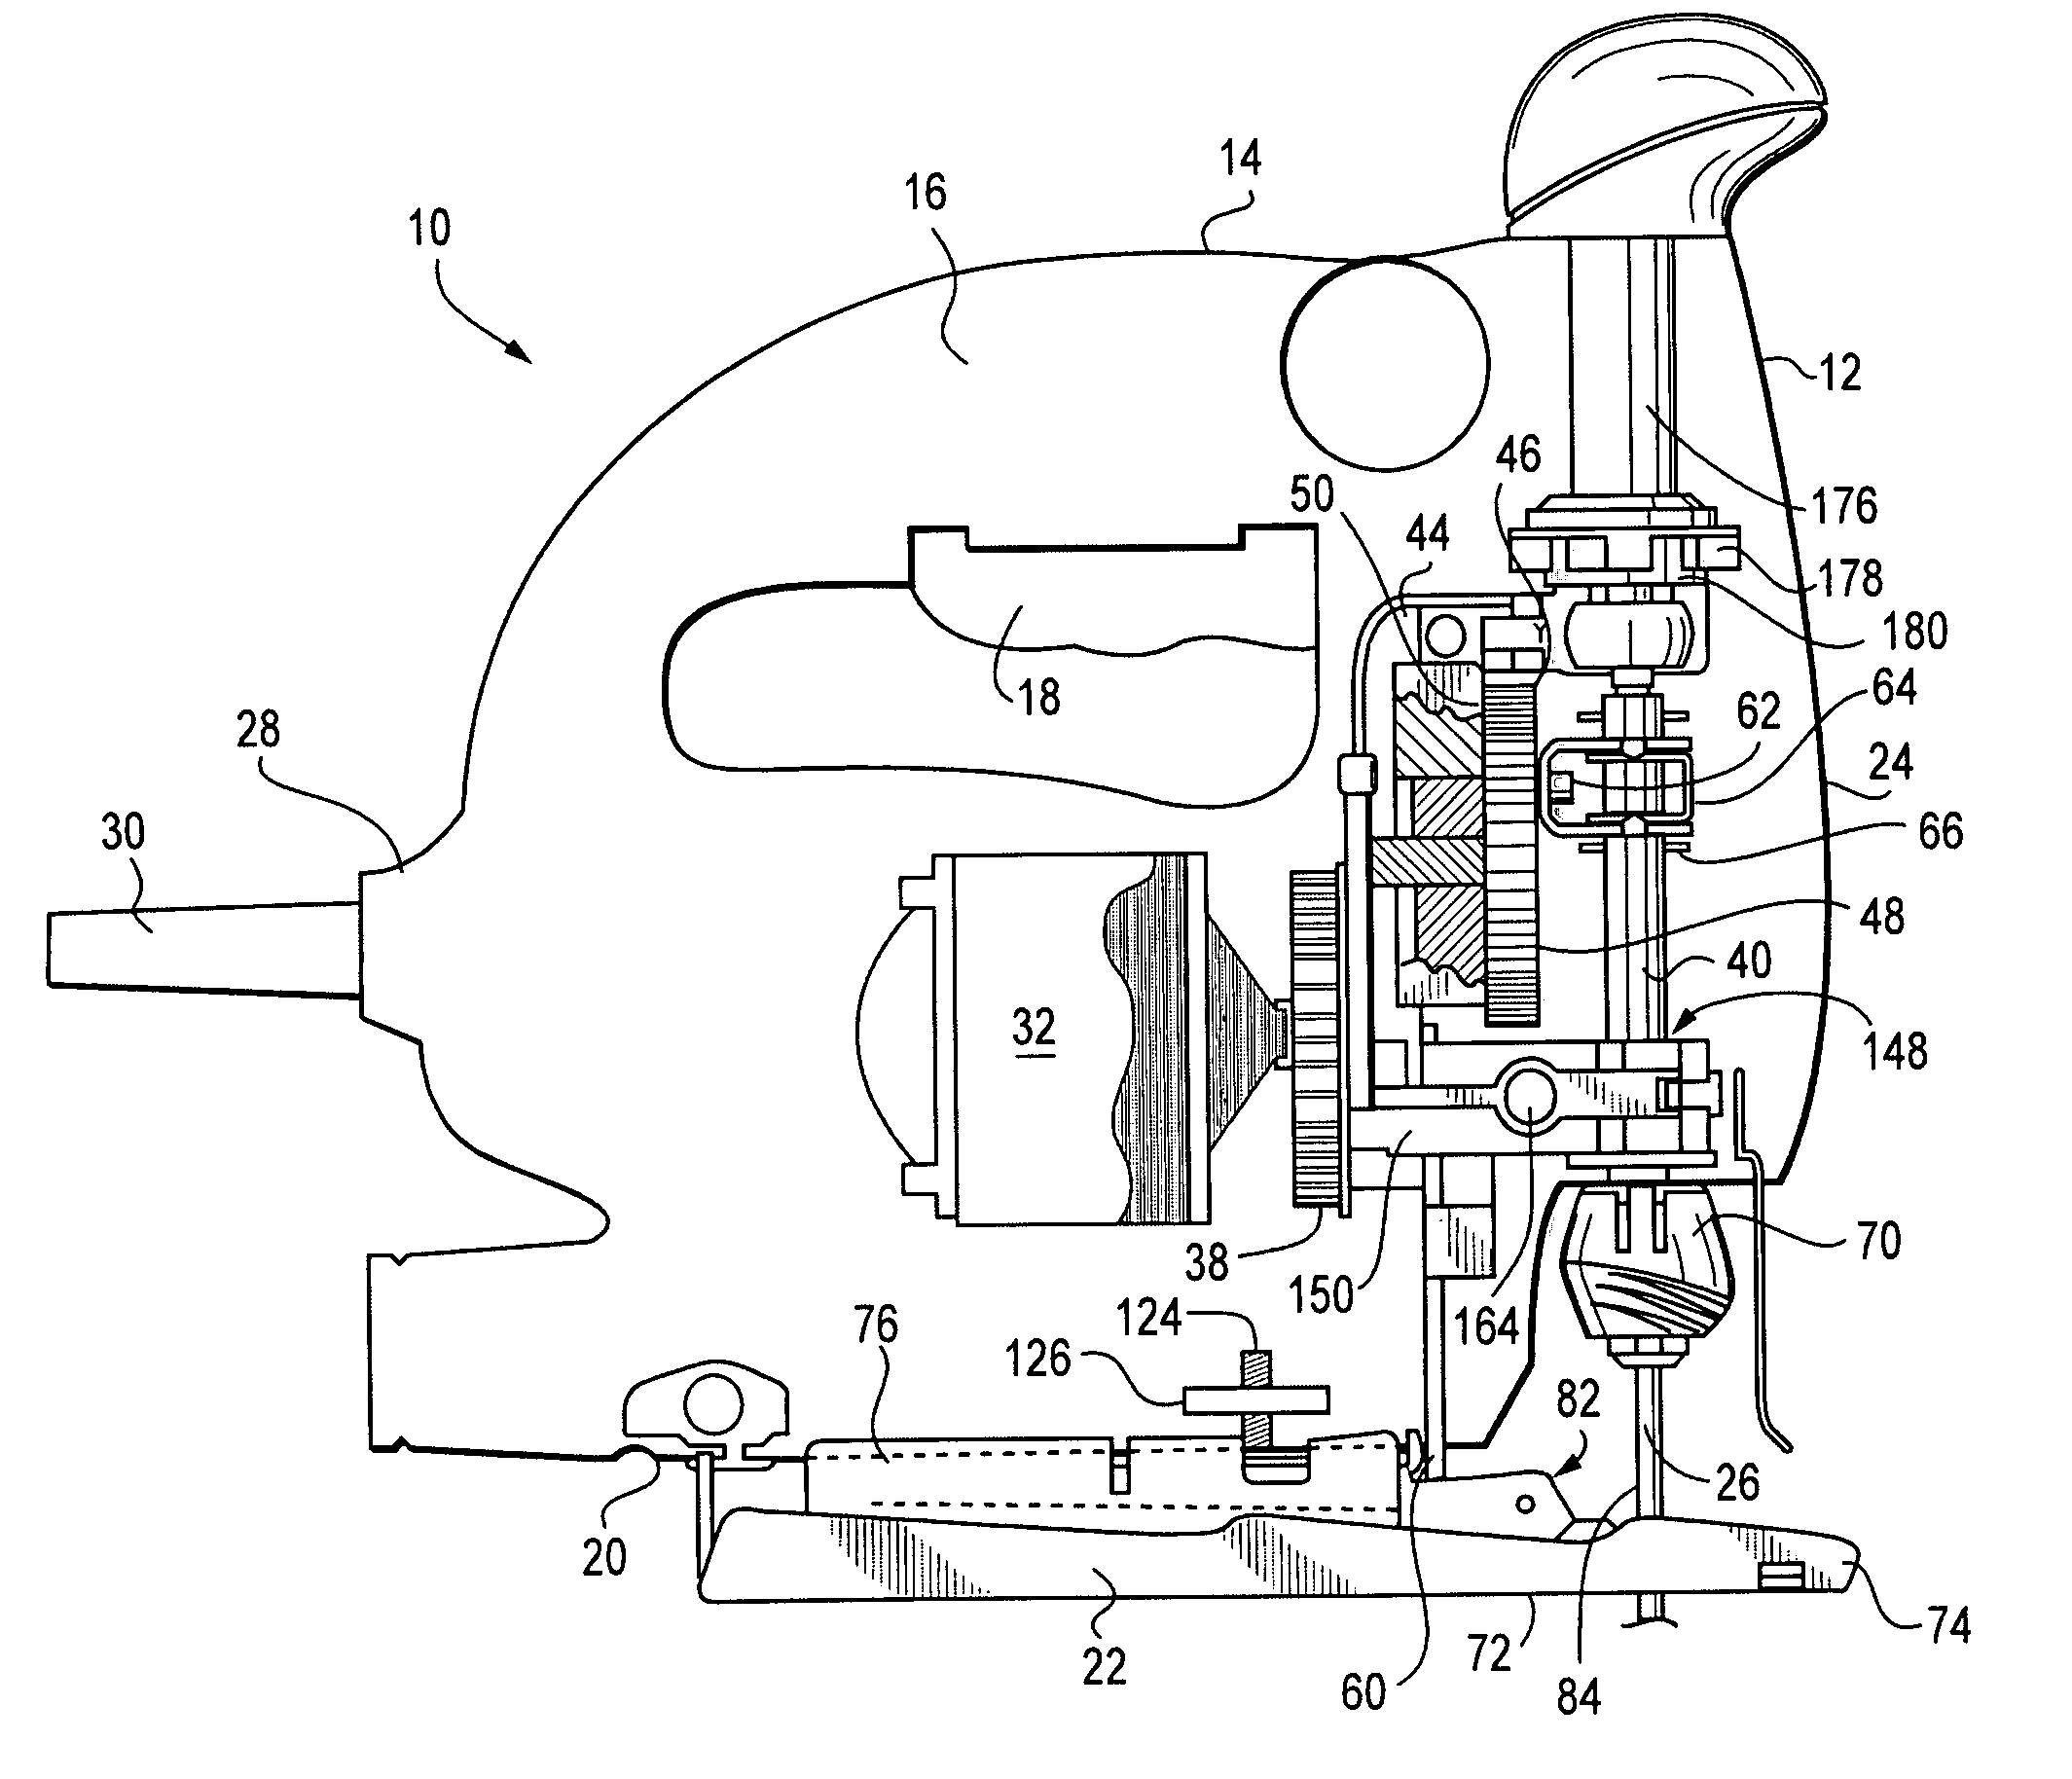 Reciprocating cutting tool with orbital action